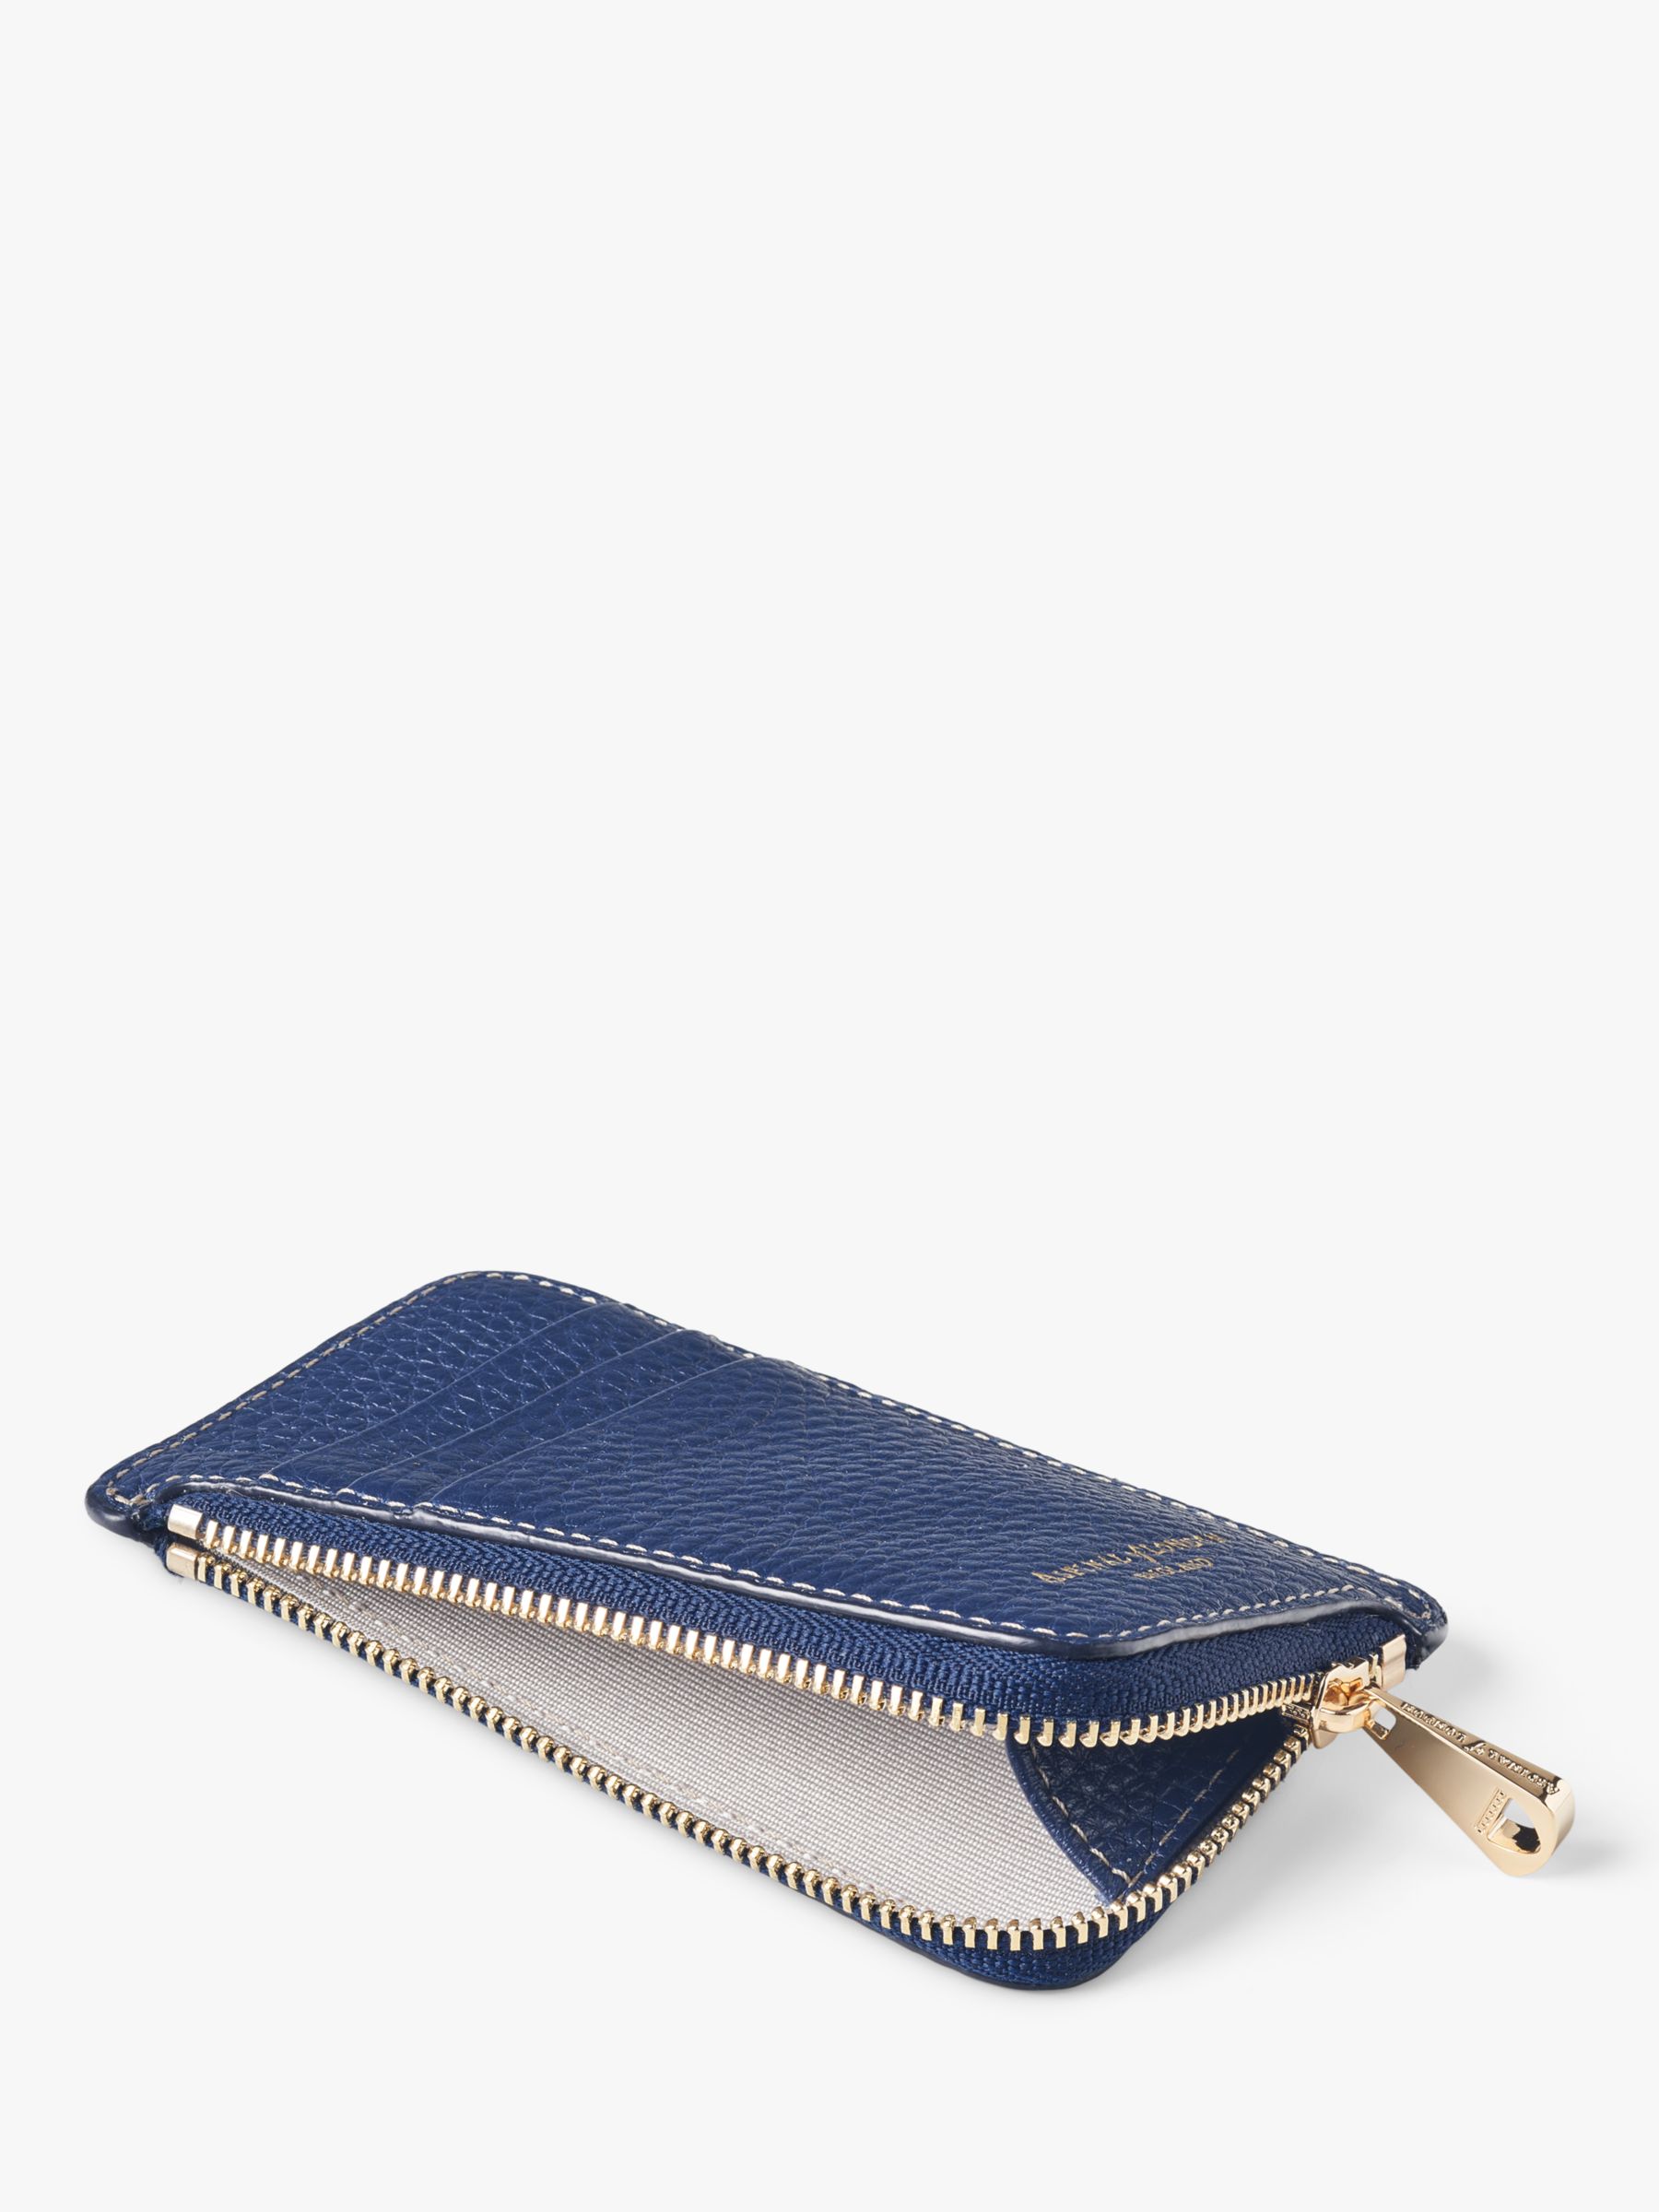 Buy Aspinal of London Pebble Leather Zipped Coin and Card Holder Online at johnlewis.com